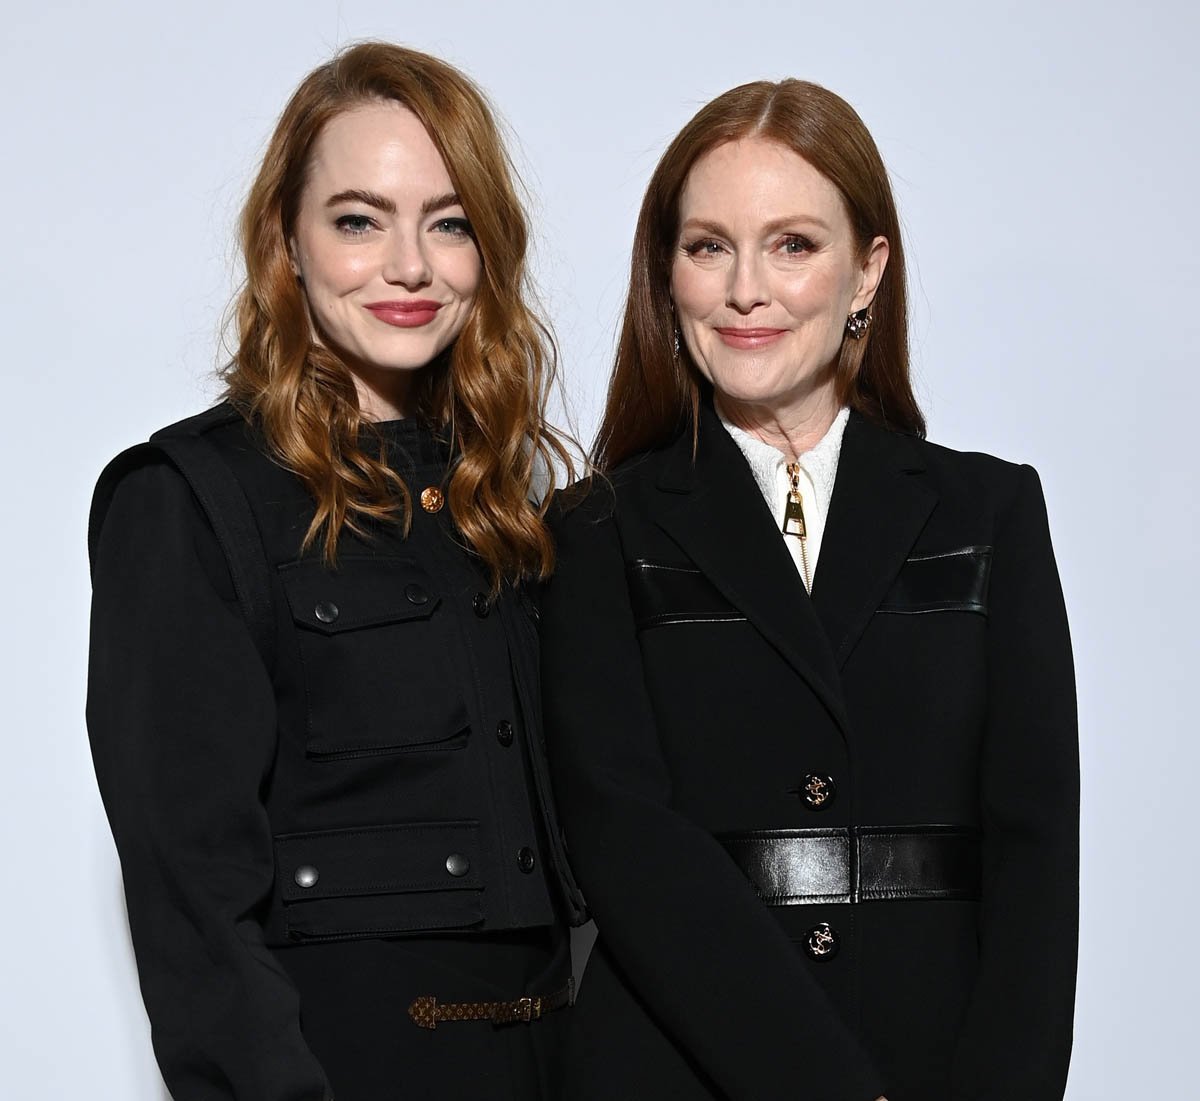 Julianne Moore attends the Louis Vuitton Cruise 2020 Fashion Show